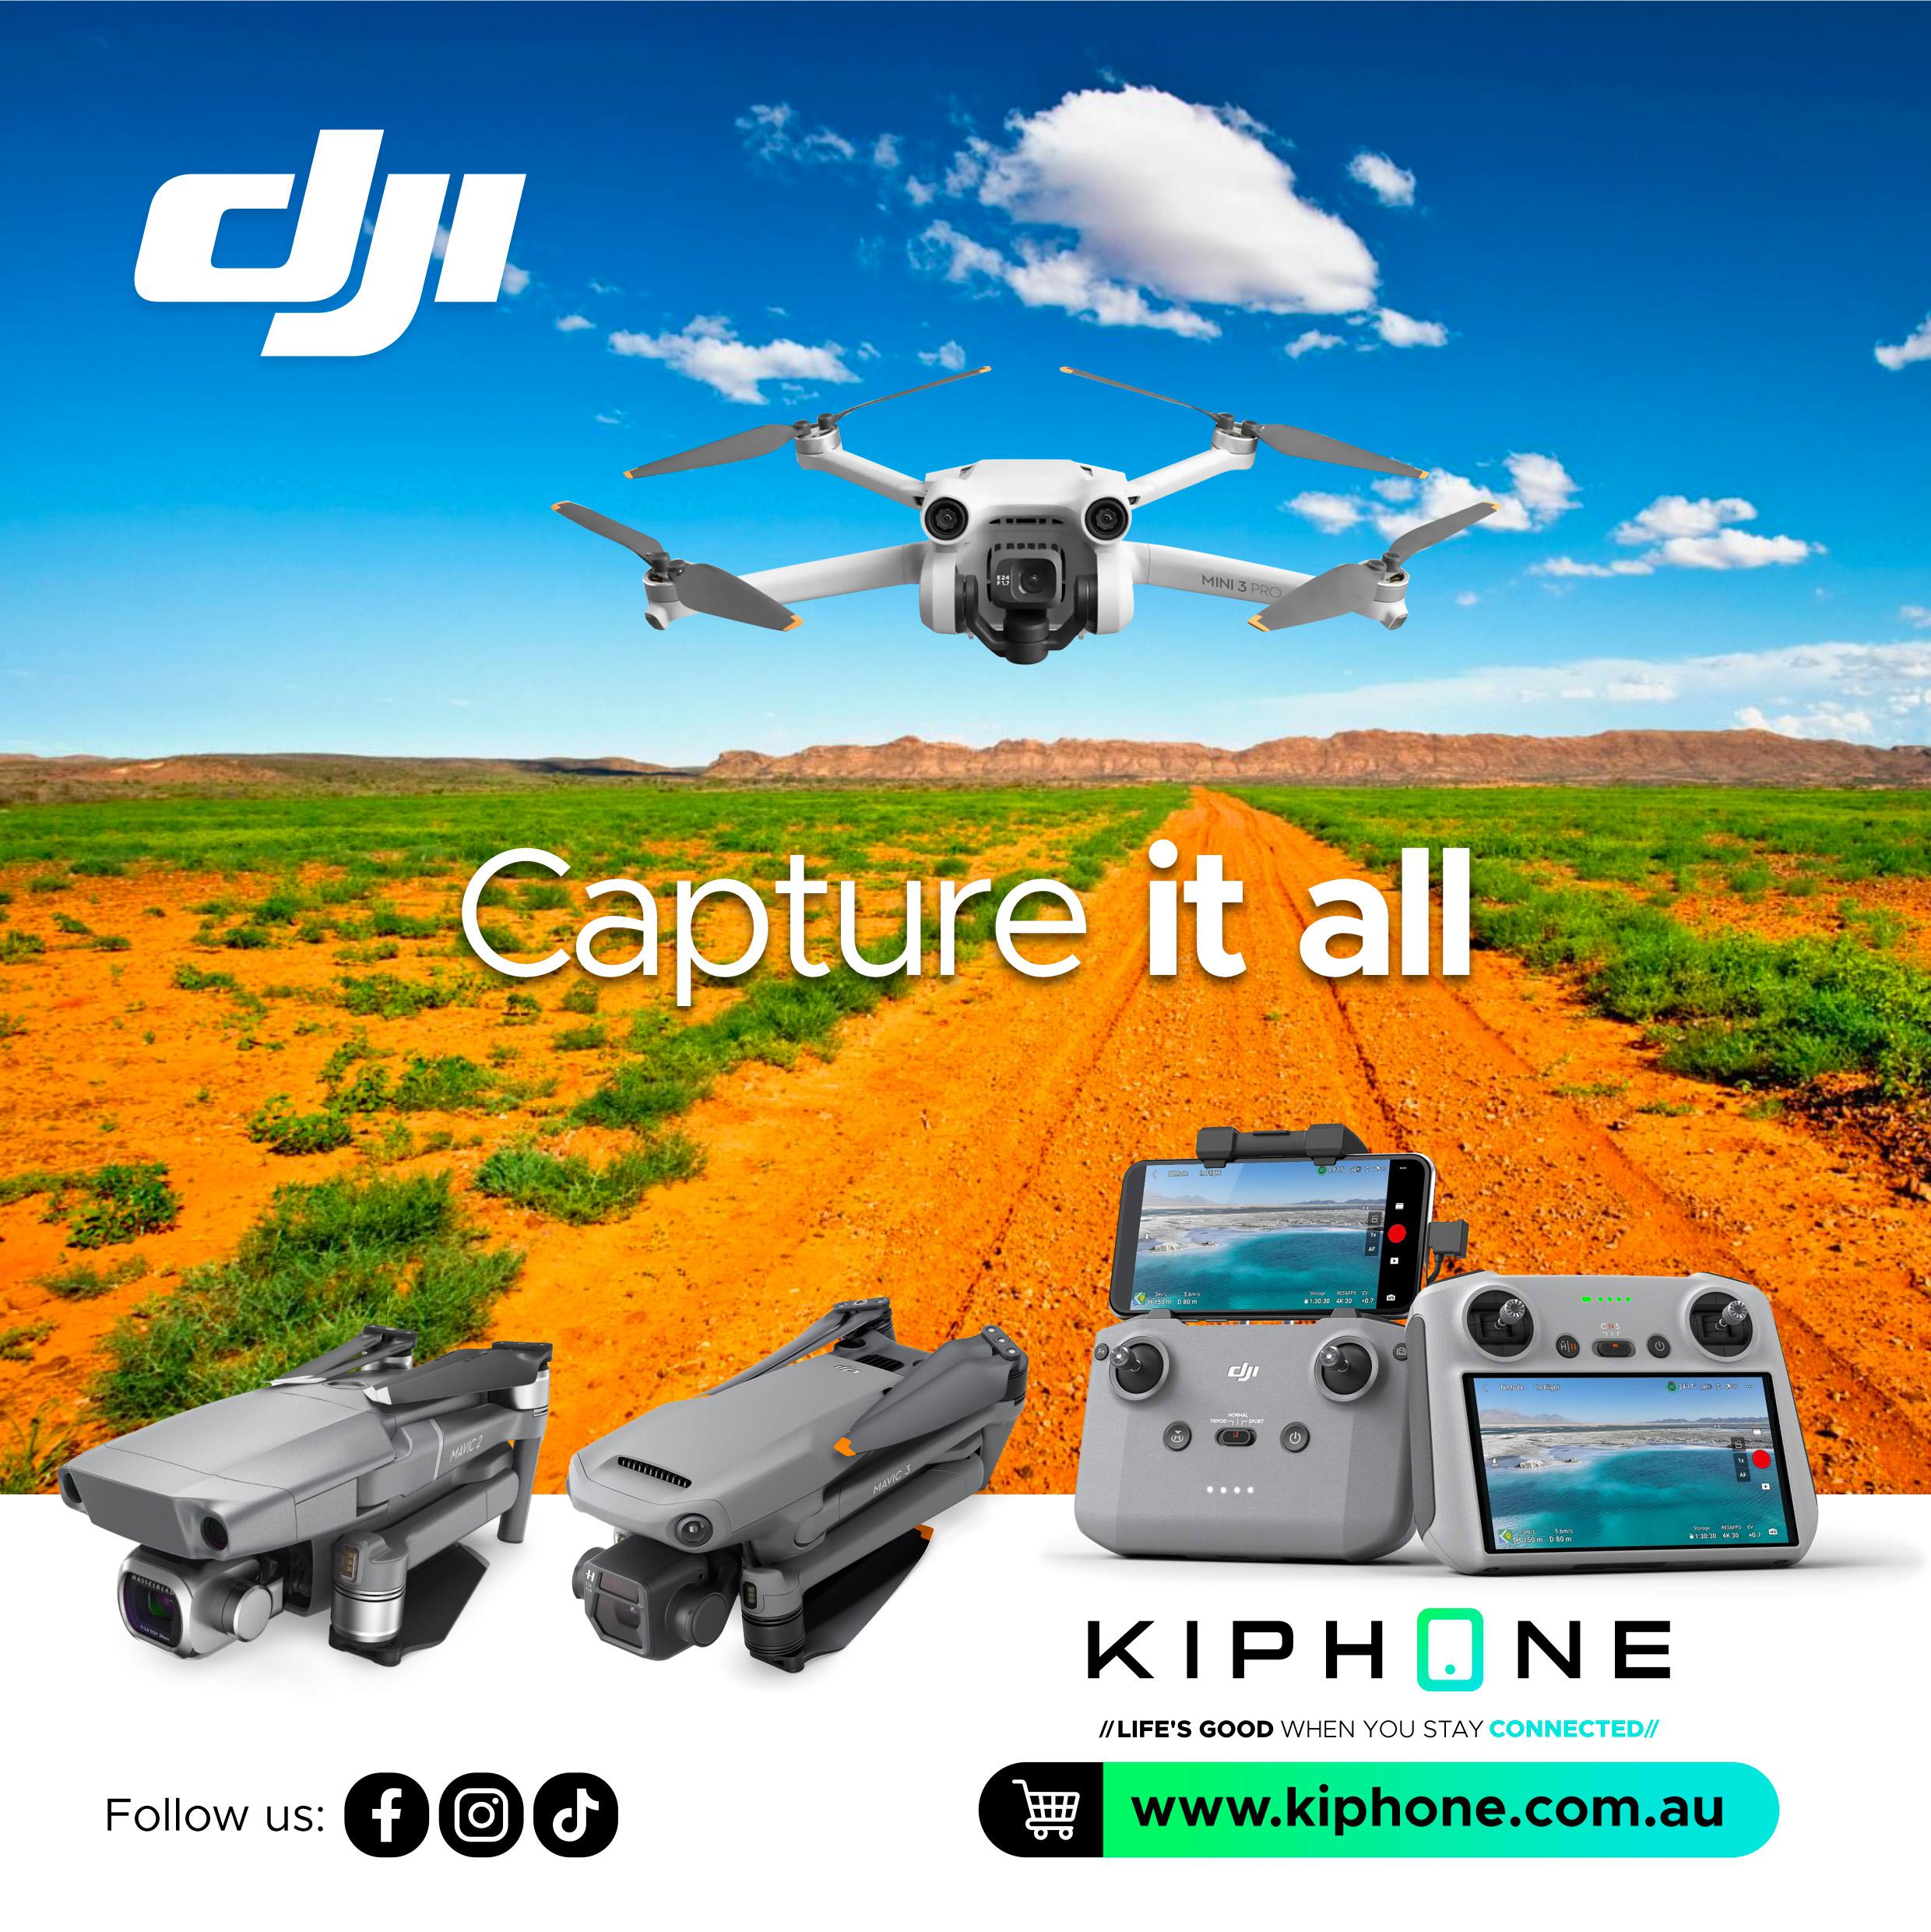 Images KIPHONE REPAIRS, TECHNOLOGY & LIFESTYLE